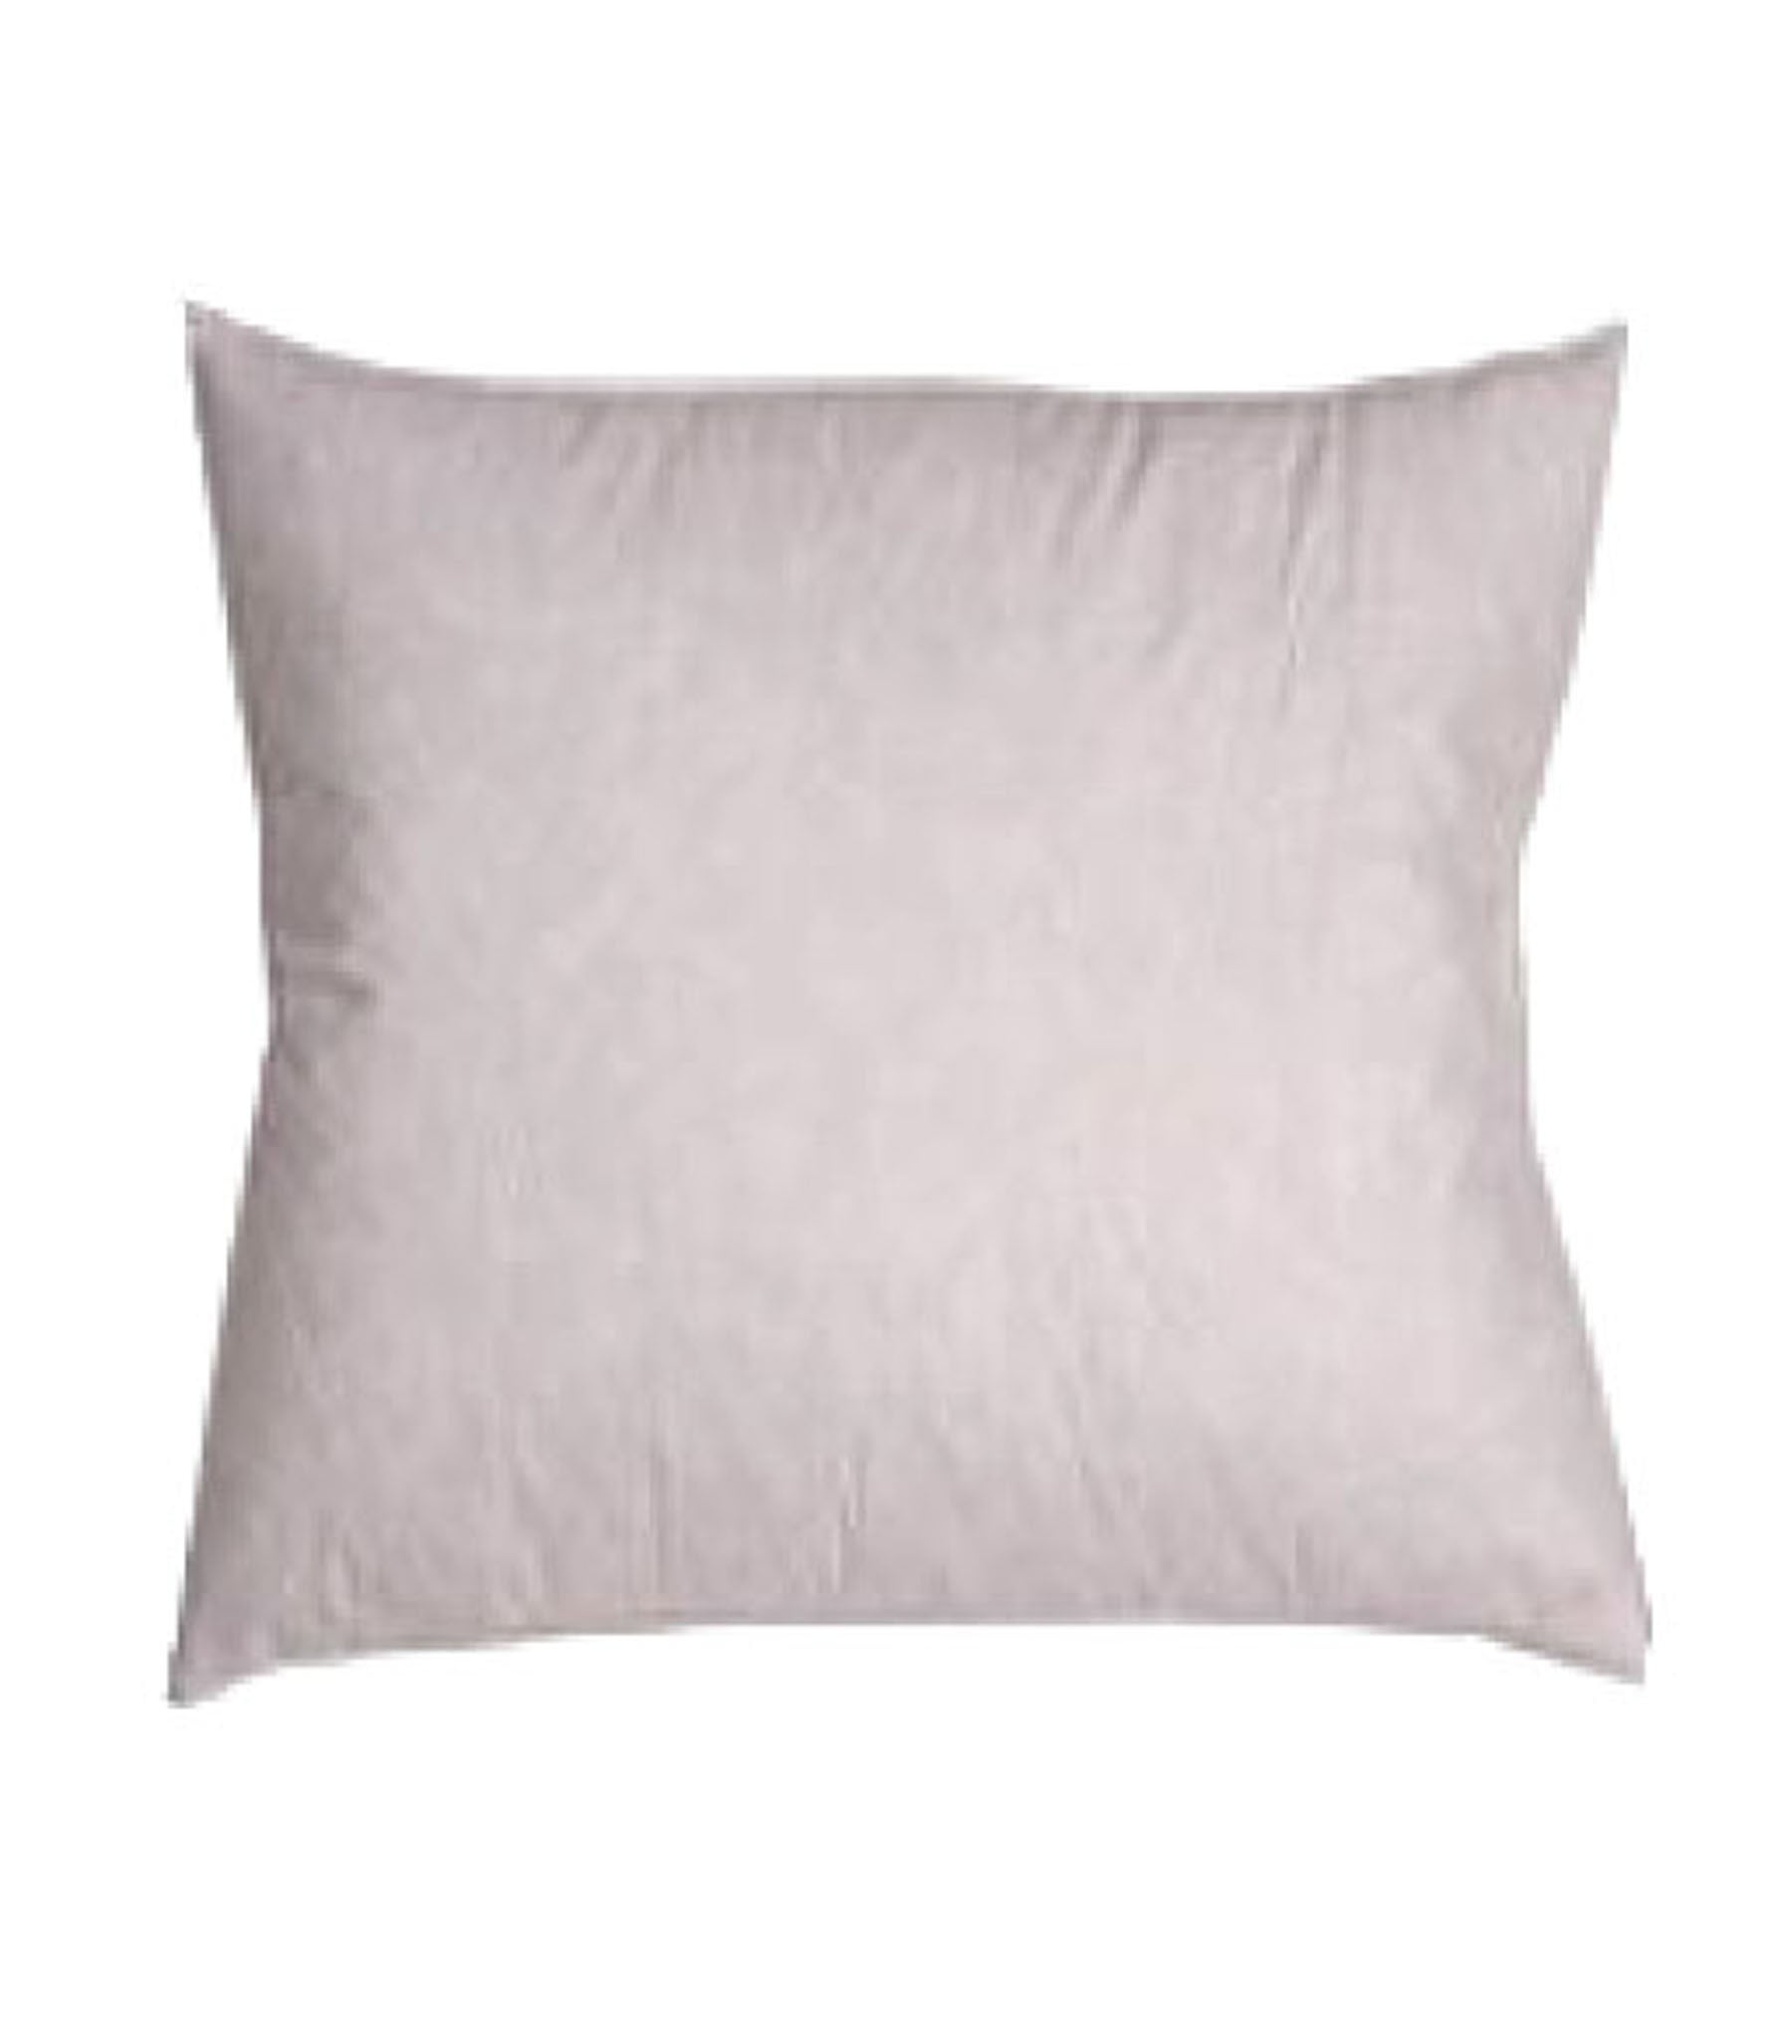 DWR Set of 2 Feather Down Throw Pillow Inserts 18x18 with Organic Cotton  Cover, Goose Feather Square White Decorative Pillow Inserts for Bed, Sofa